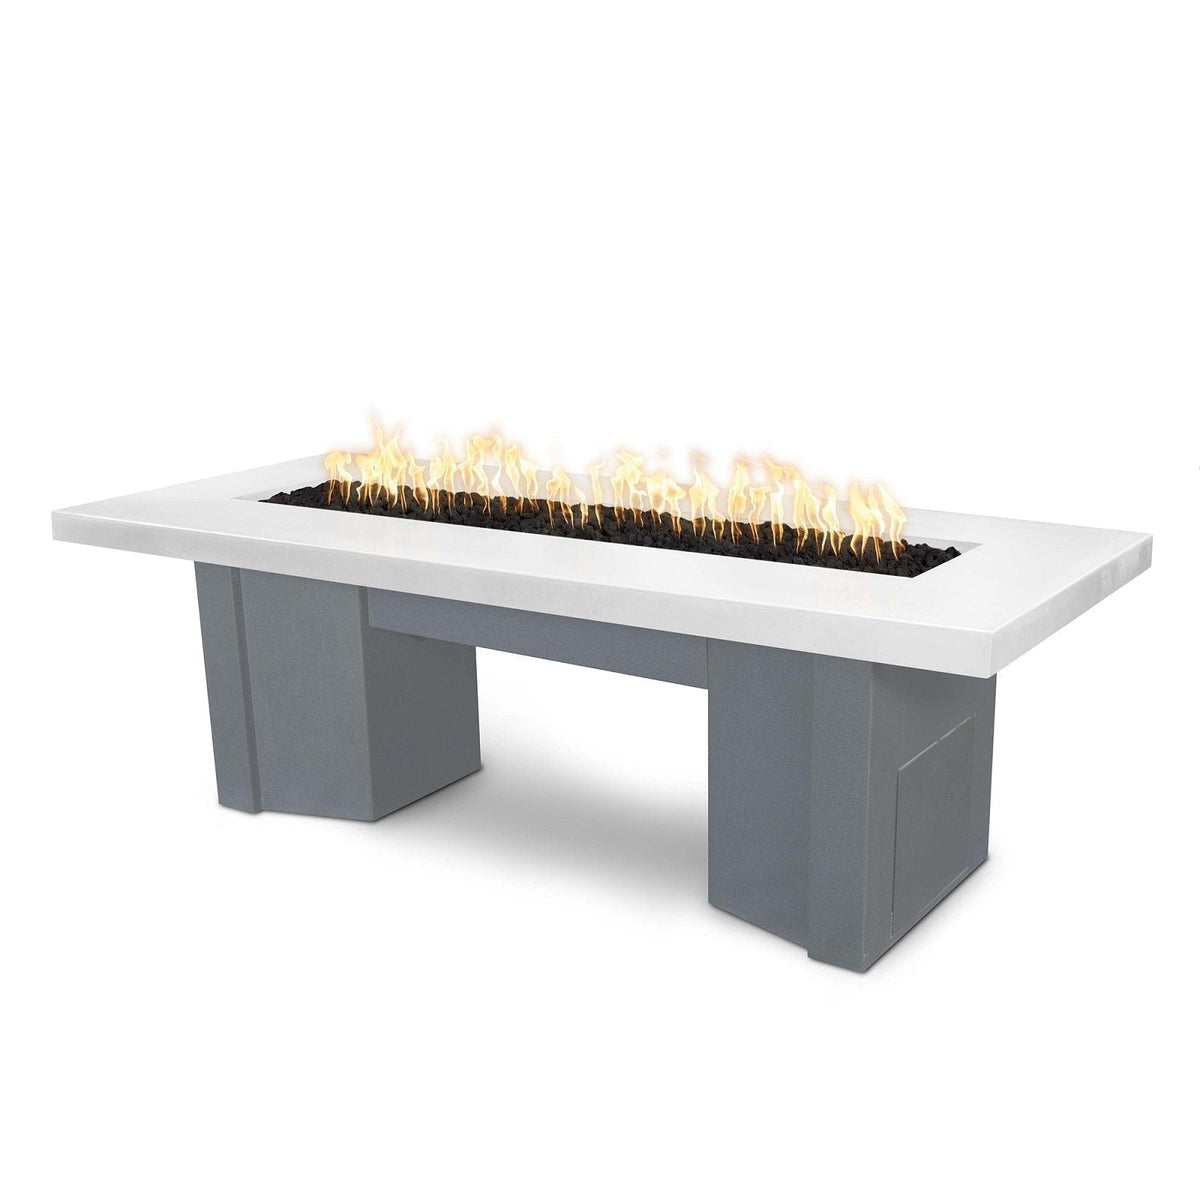 The Outdoor Plus Fire Features Limestone (-LIM) / Gray Powder Coated Steel (-GRY) The Outdoor Plus 60&quot; Alameda Fire Table Smooth Concrete in Liquid Propane - Flame Sense System with Push Button Spark Igniter / OPT-ALMGFRC60FSEN-LP